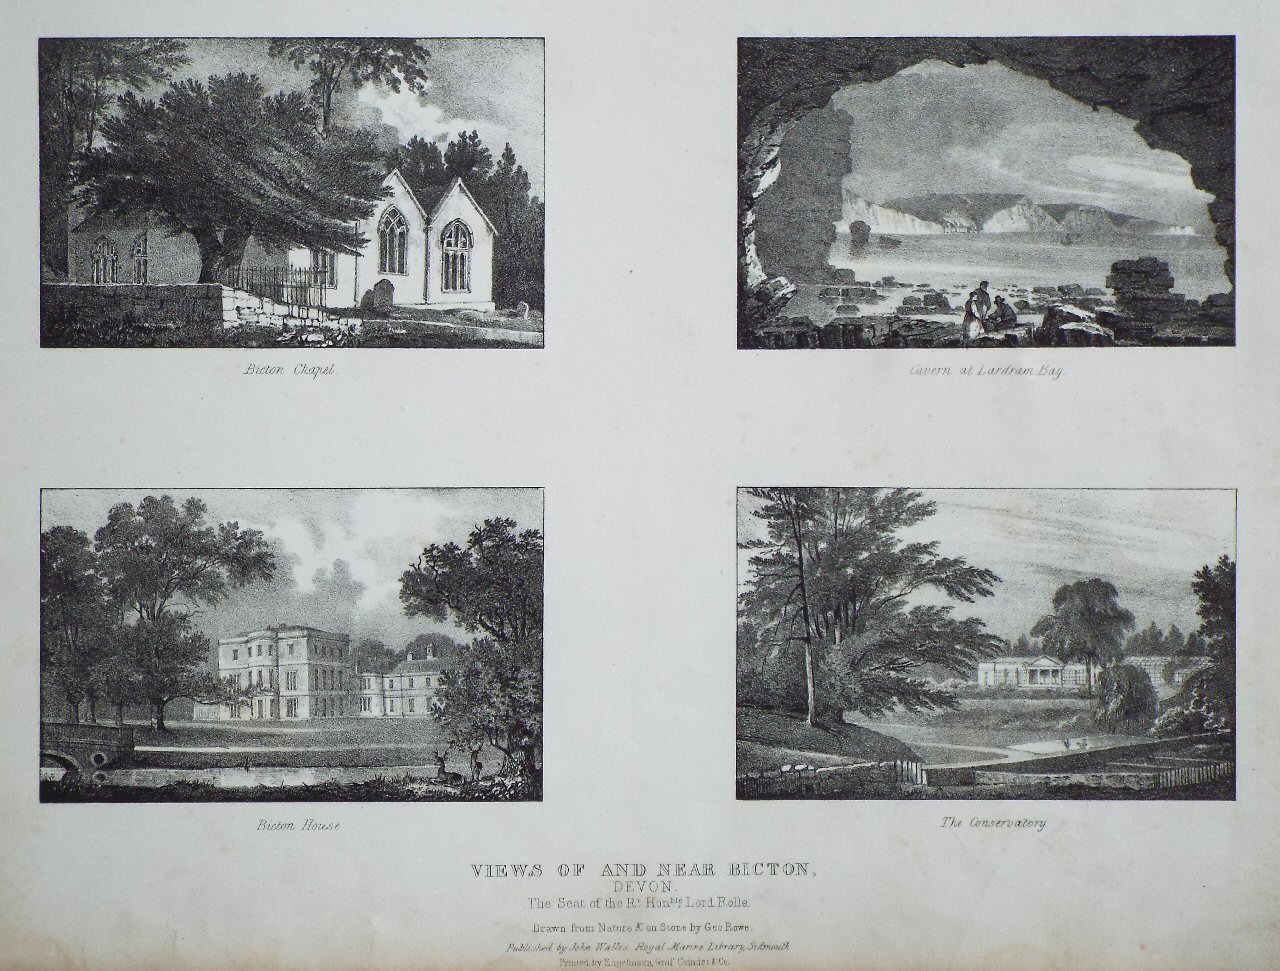 Lithograph - Views of and near Bicton, Devon. The Seat of the Righ Honble. Lord Rolle. Bicton Chapel, Cavern at Lardram Bay, Bicton House, The Conservatory - Rowe